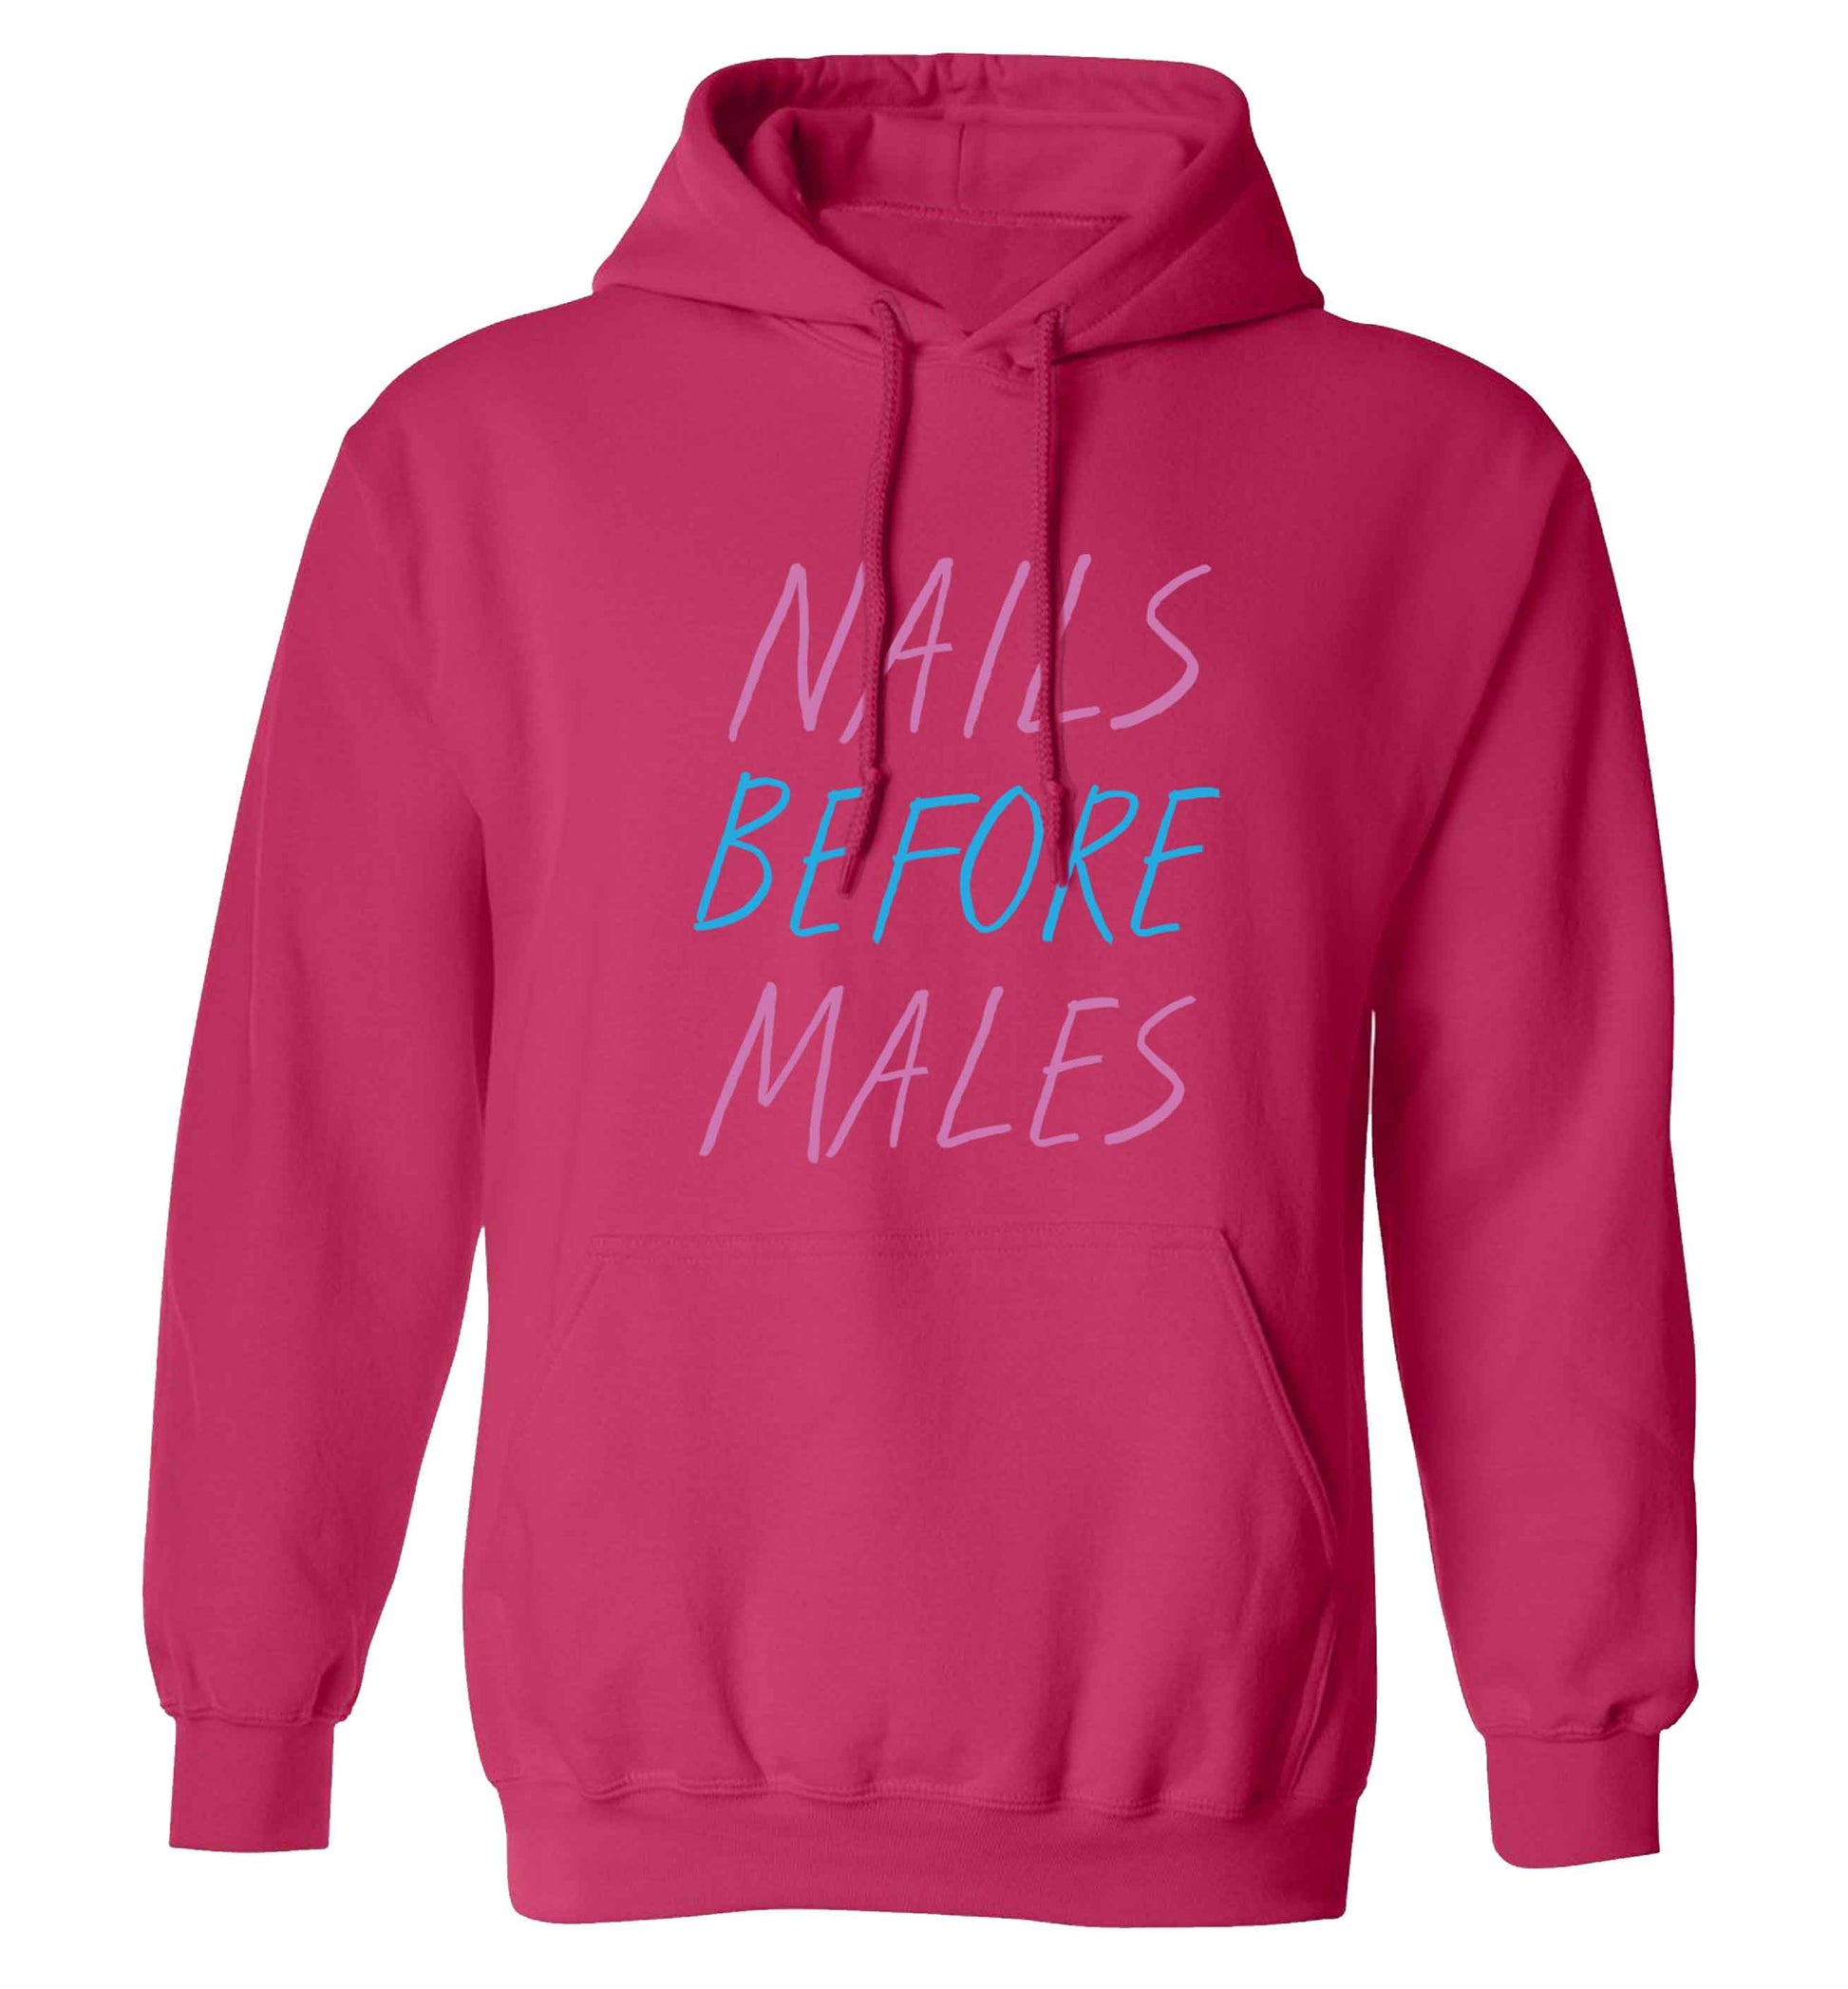 Nails before males adults unisex pink hoodie 2XL